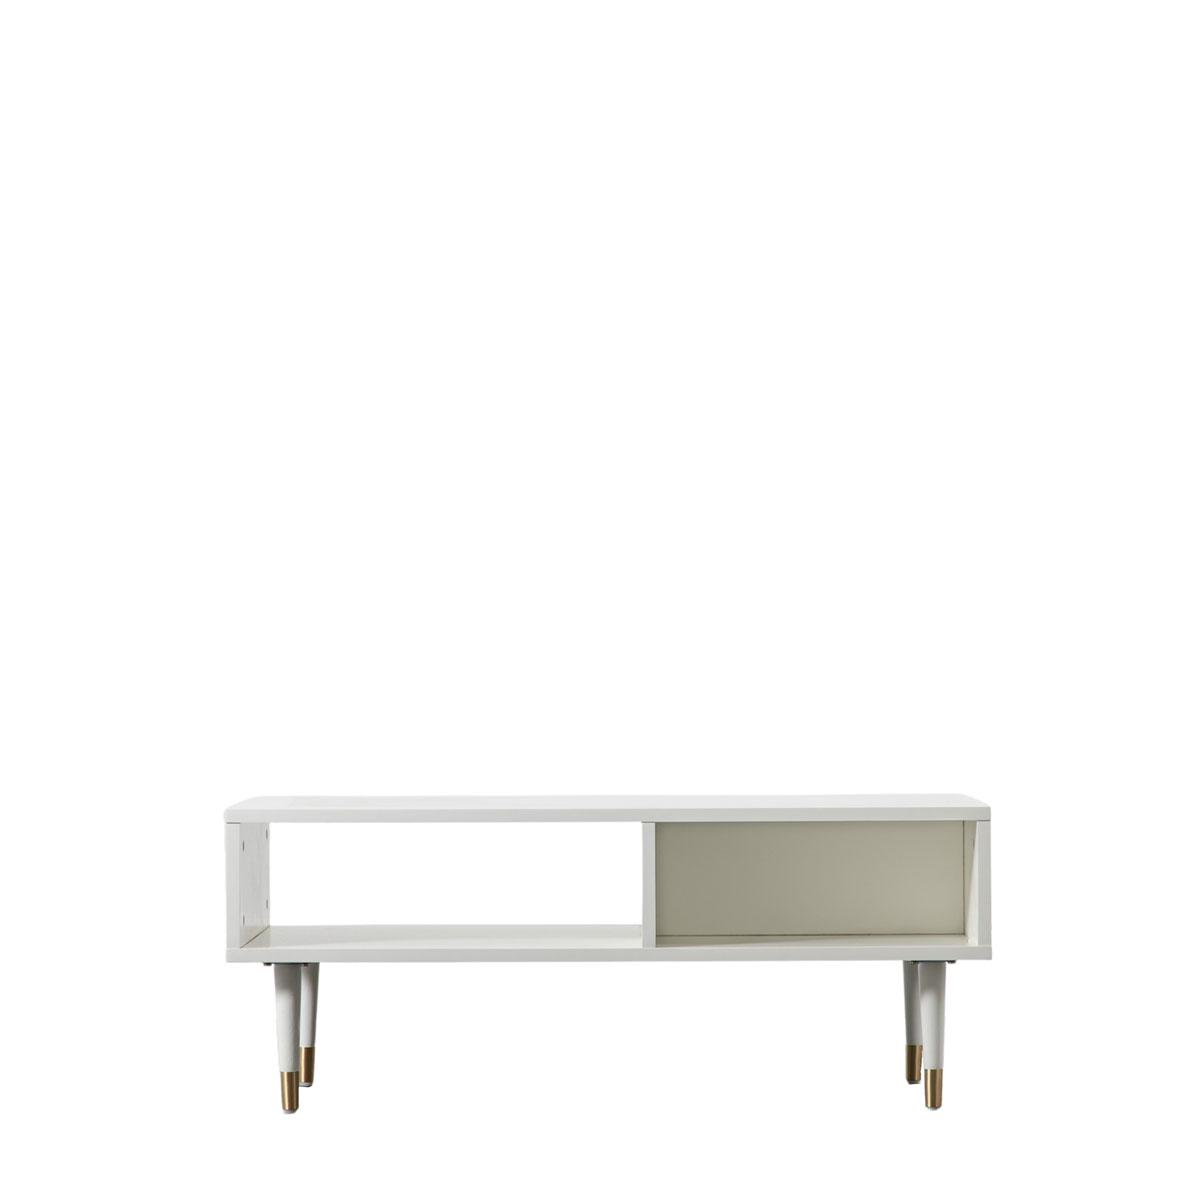 Holbrook Coffee Table White 1000x500x400mm